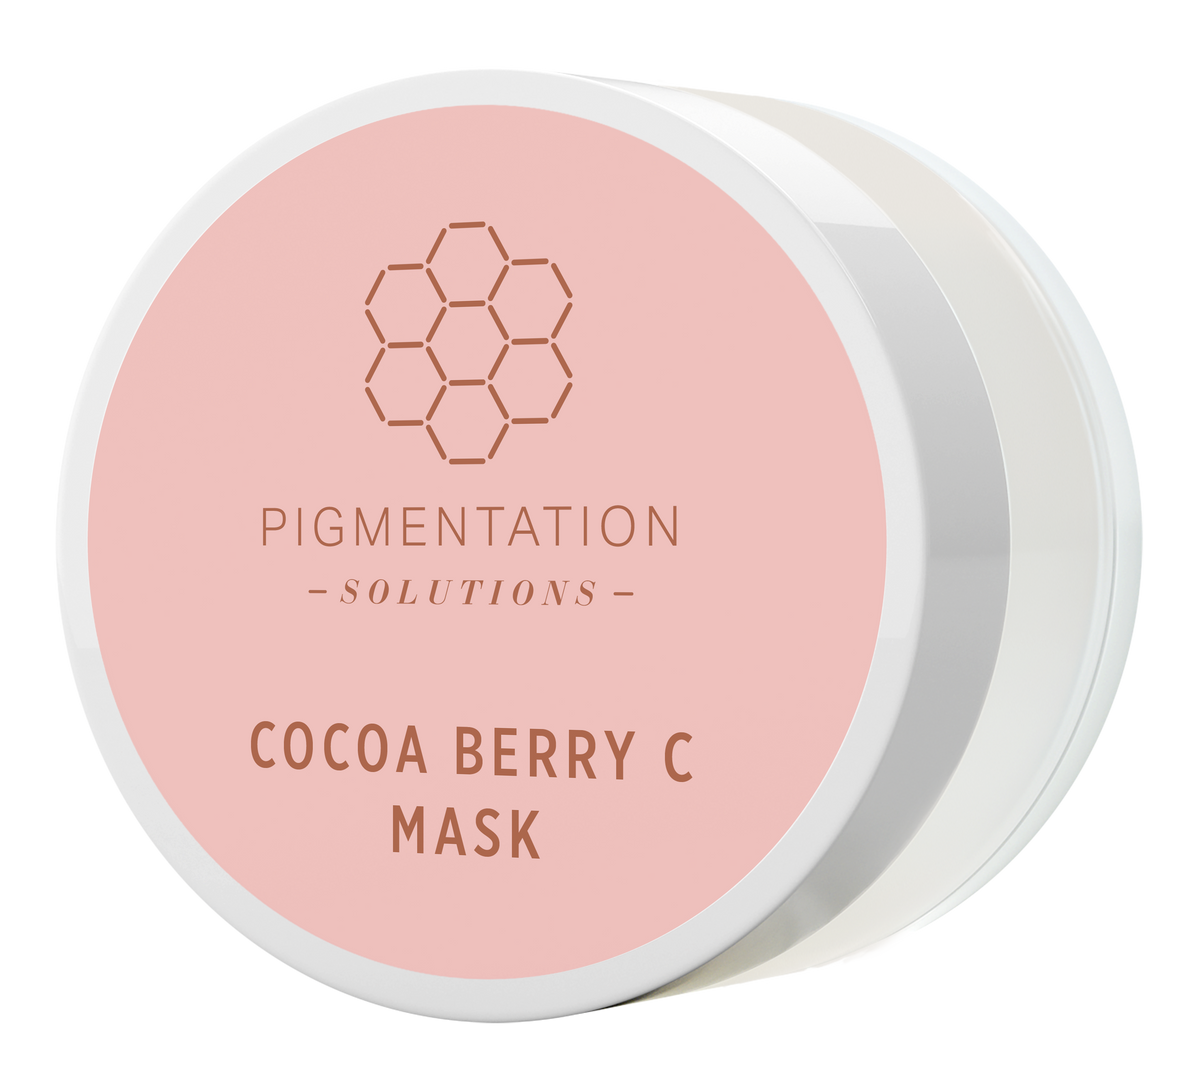 Cocoa Berry C Mask